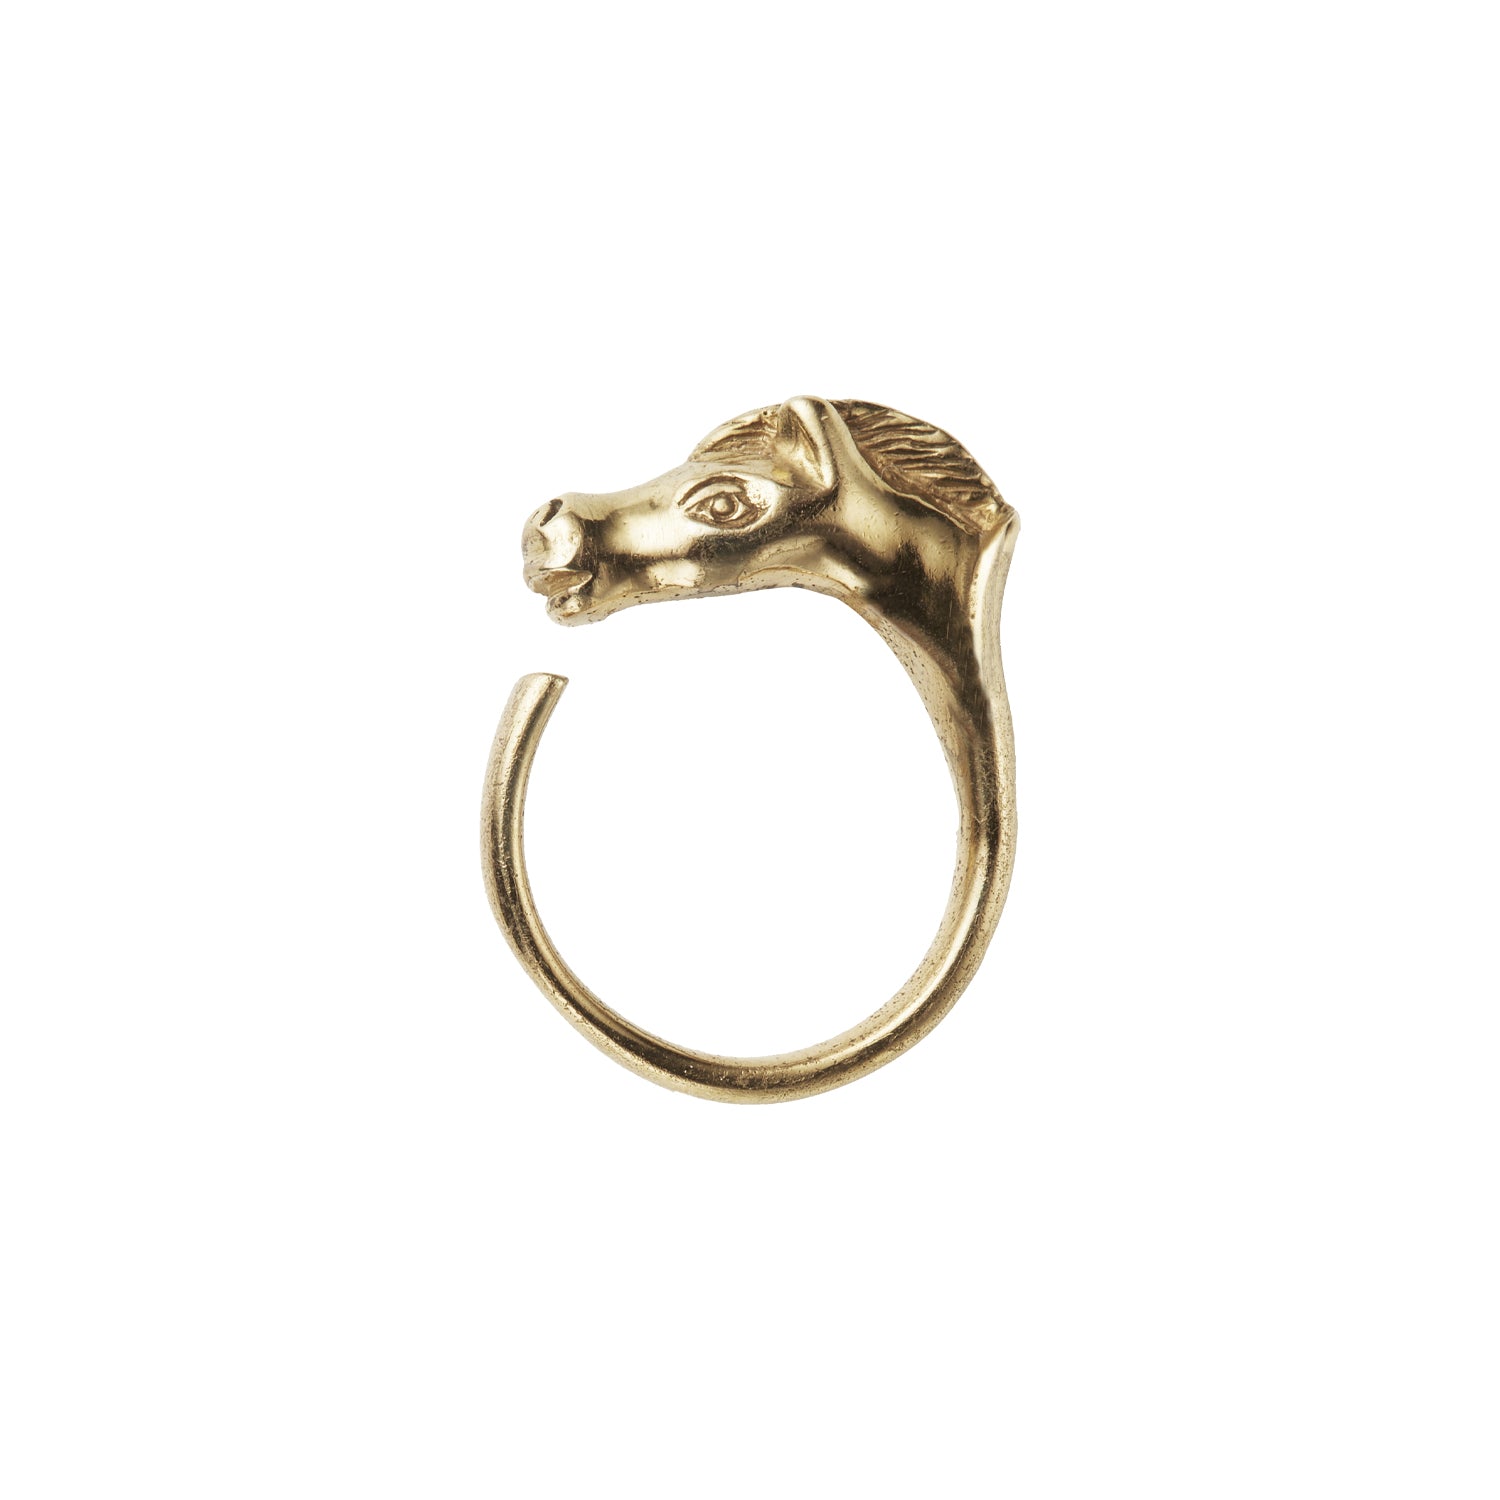 G&F Co.- HORSE RING _ SILVER 925 & 18 GOLD COATING